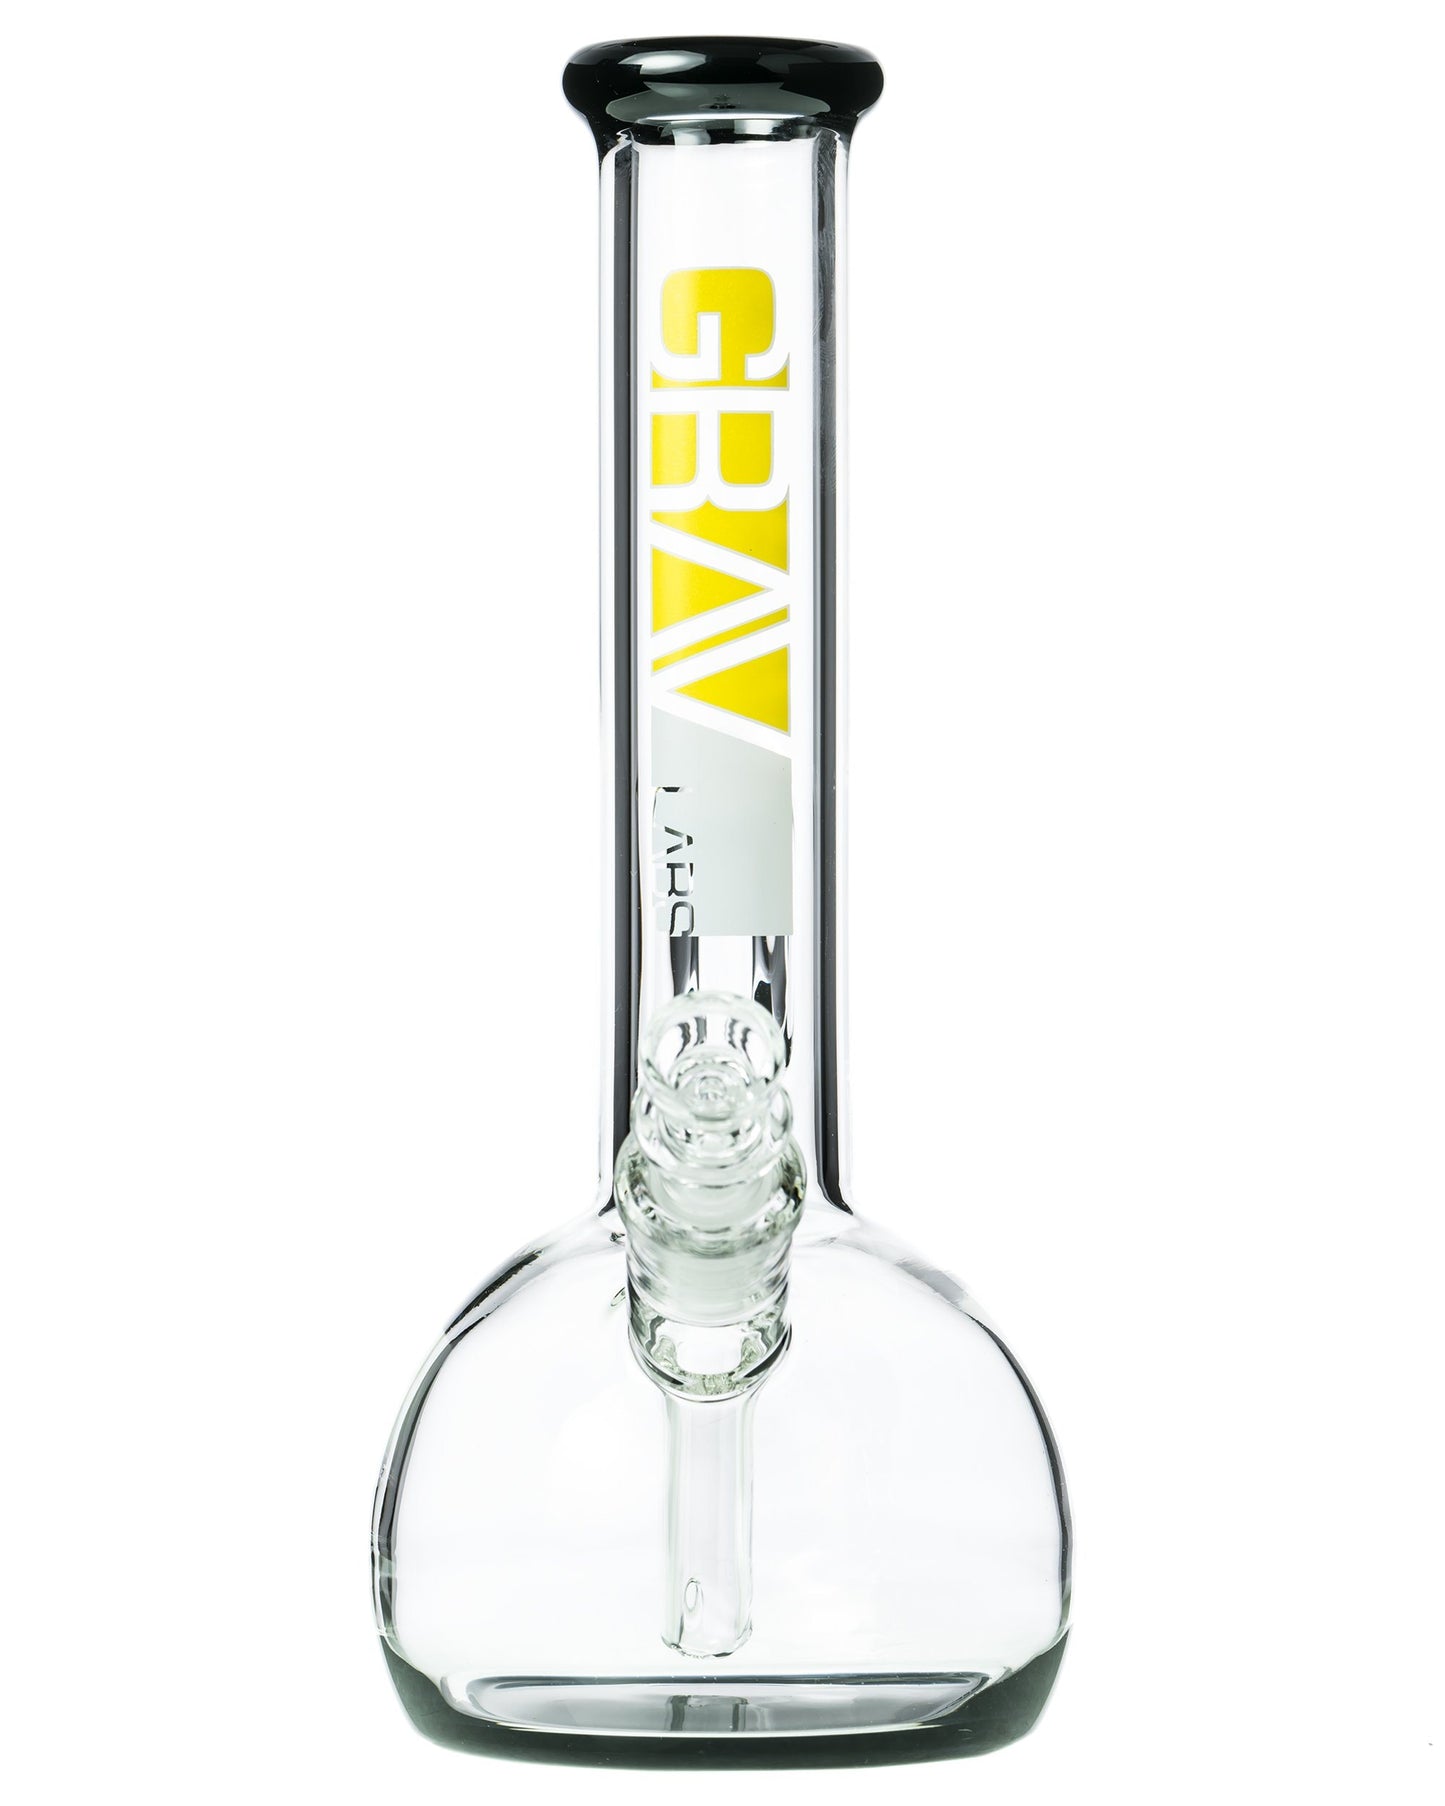 8" Bubble Base Bong at Flower Power Packages